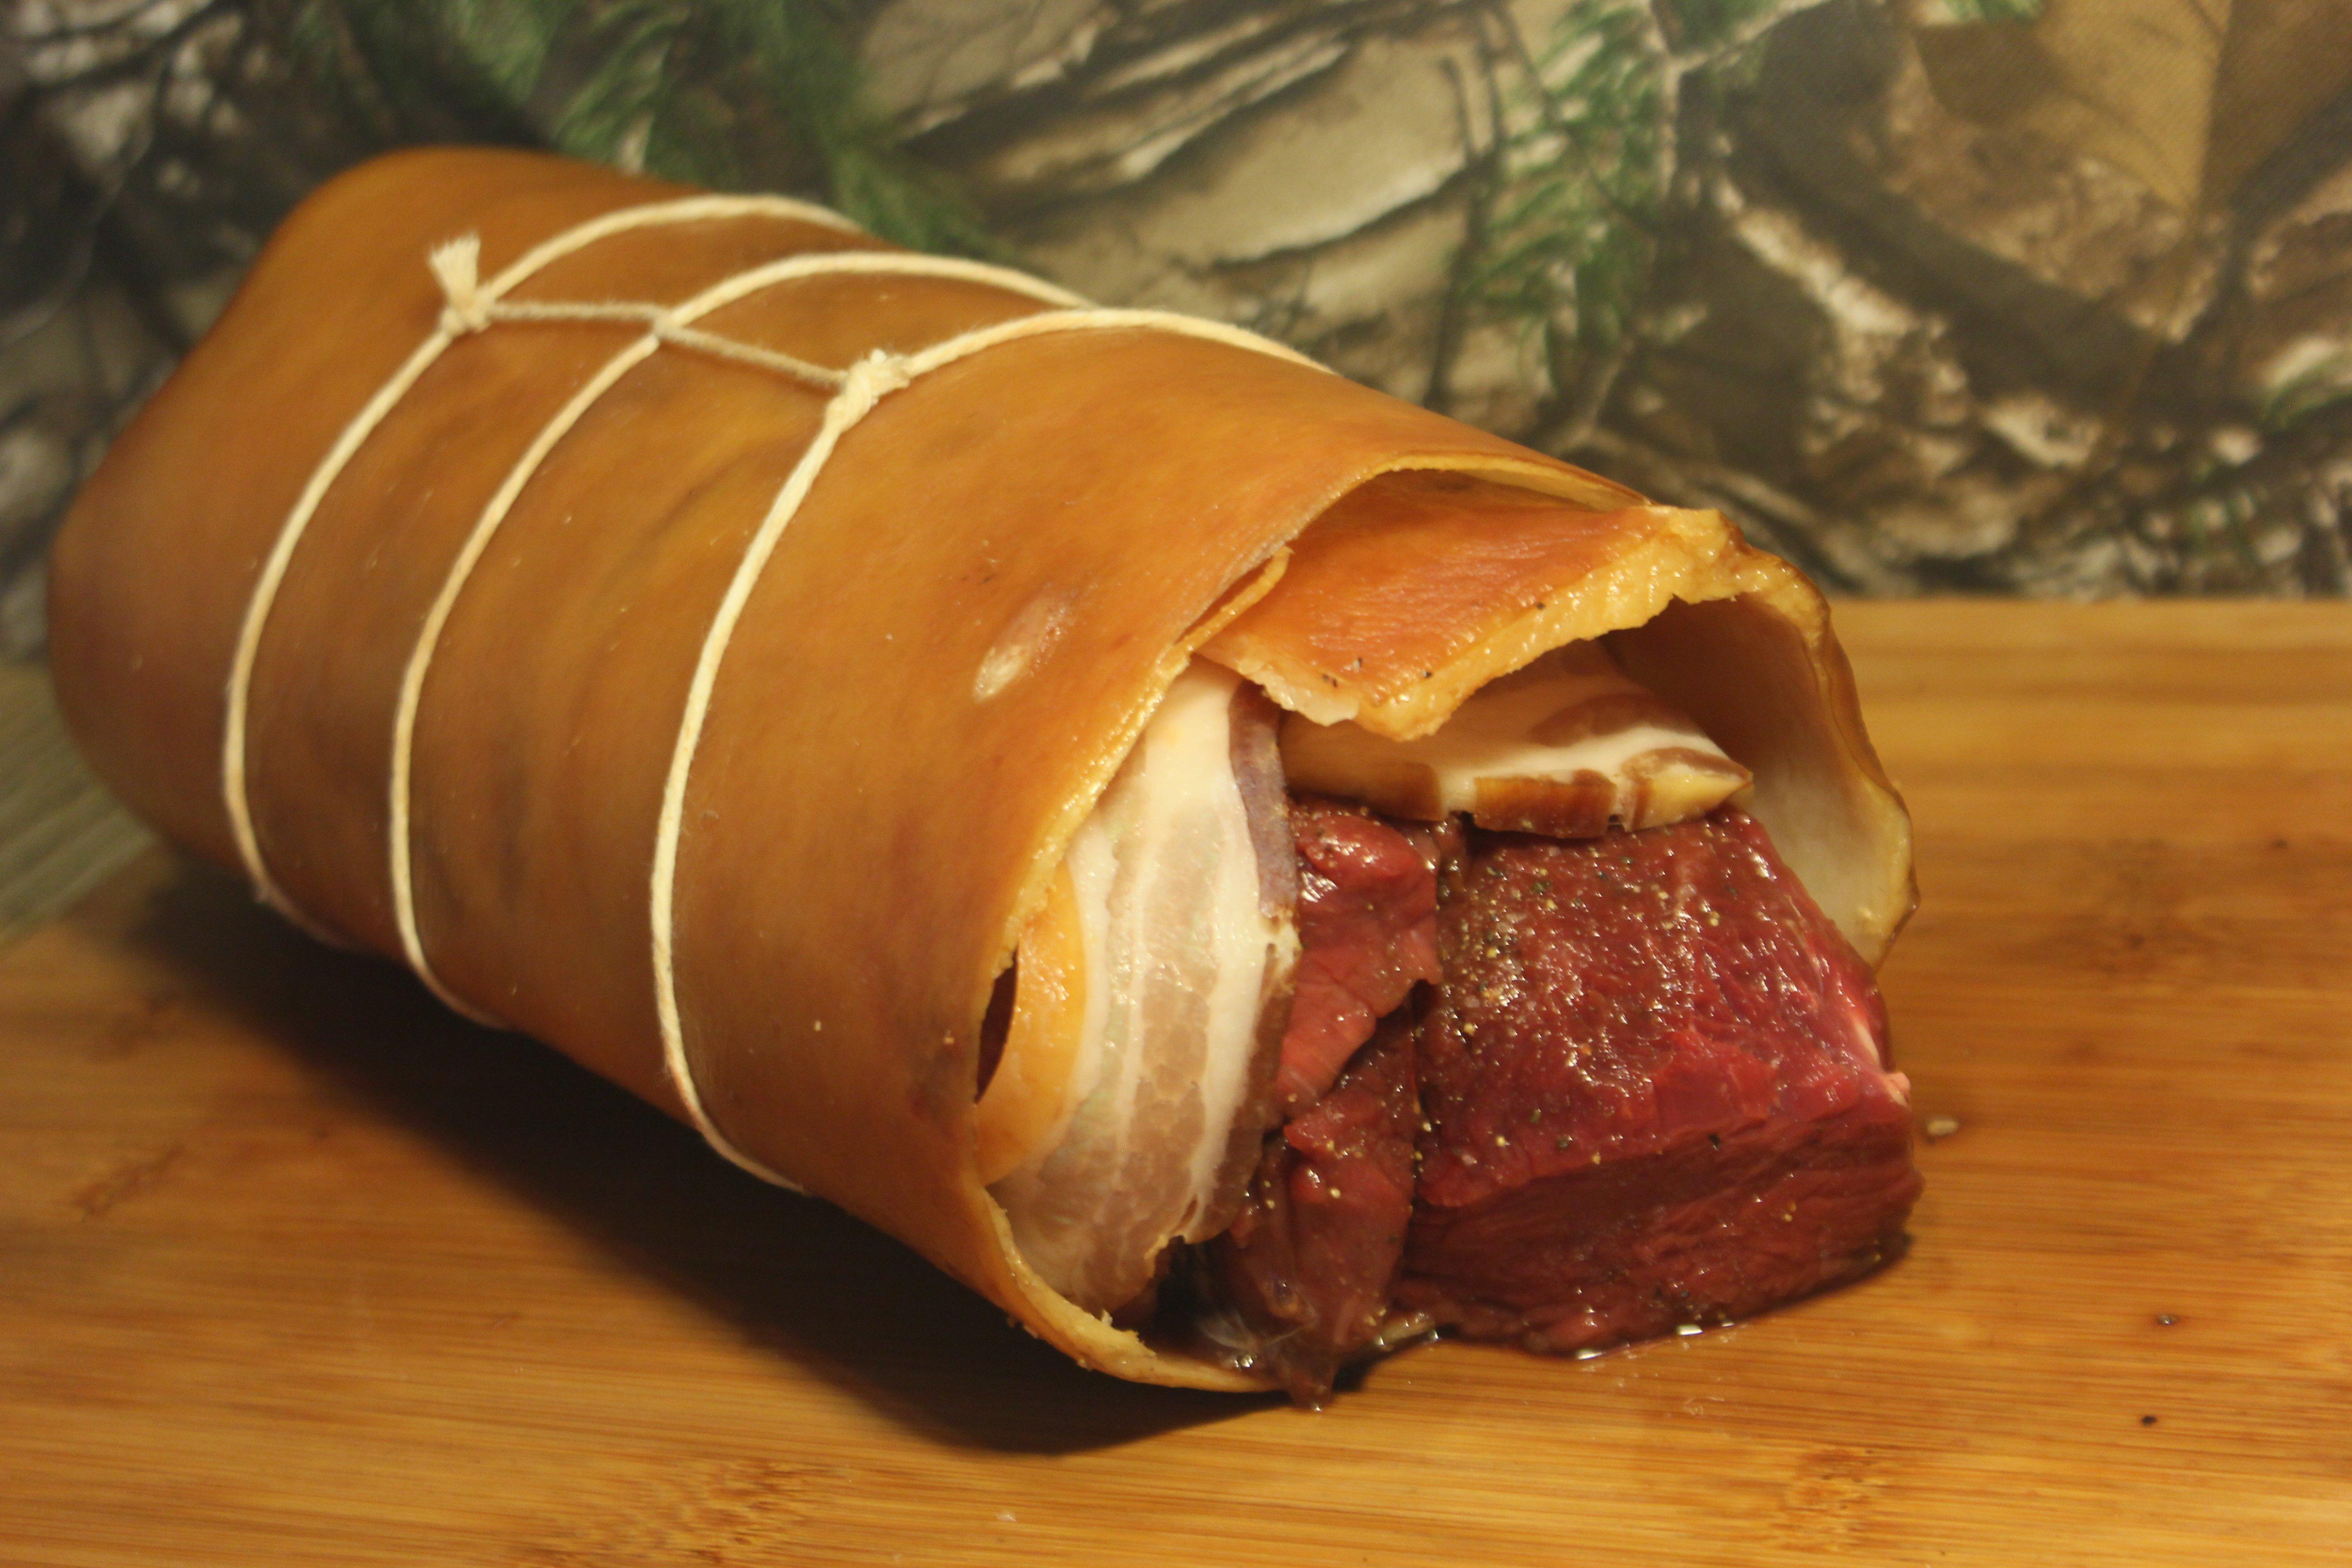 Wrapped and tied, ready to roast.